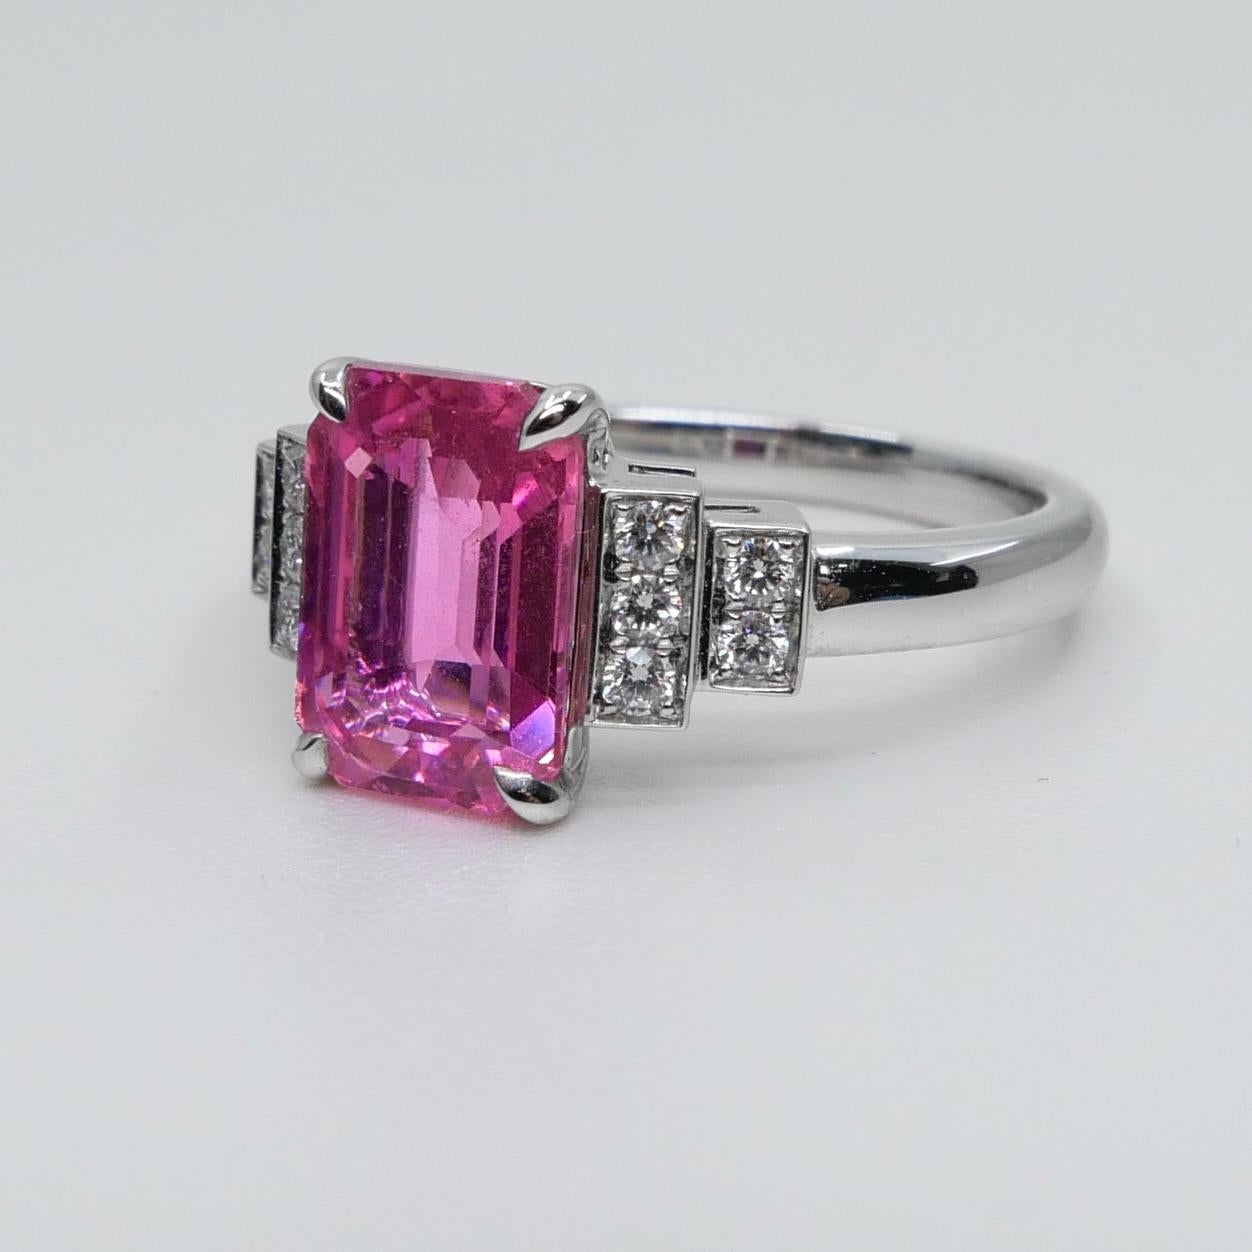 GRS Certified 3.11 Cts No Heat Pink Sapphire & Diamond Ring. Art Deco Style 5